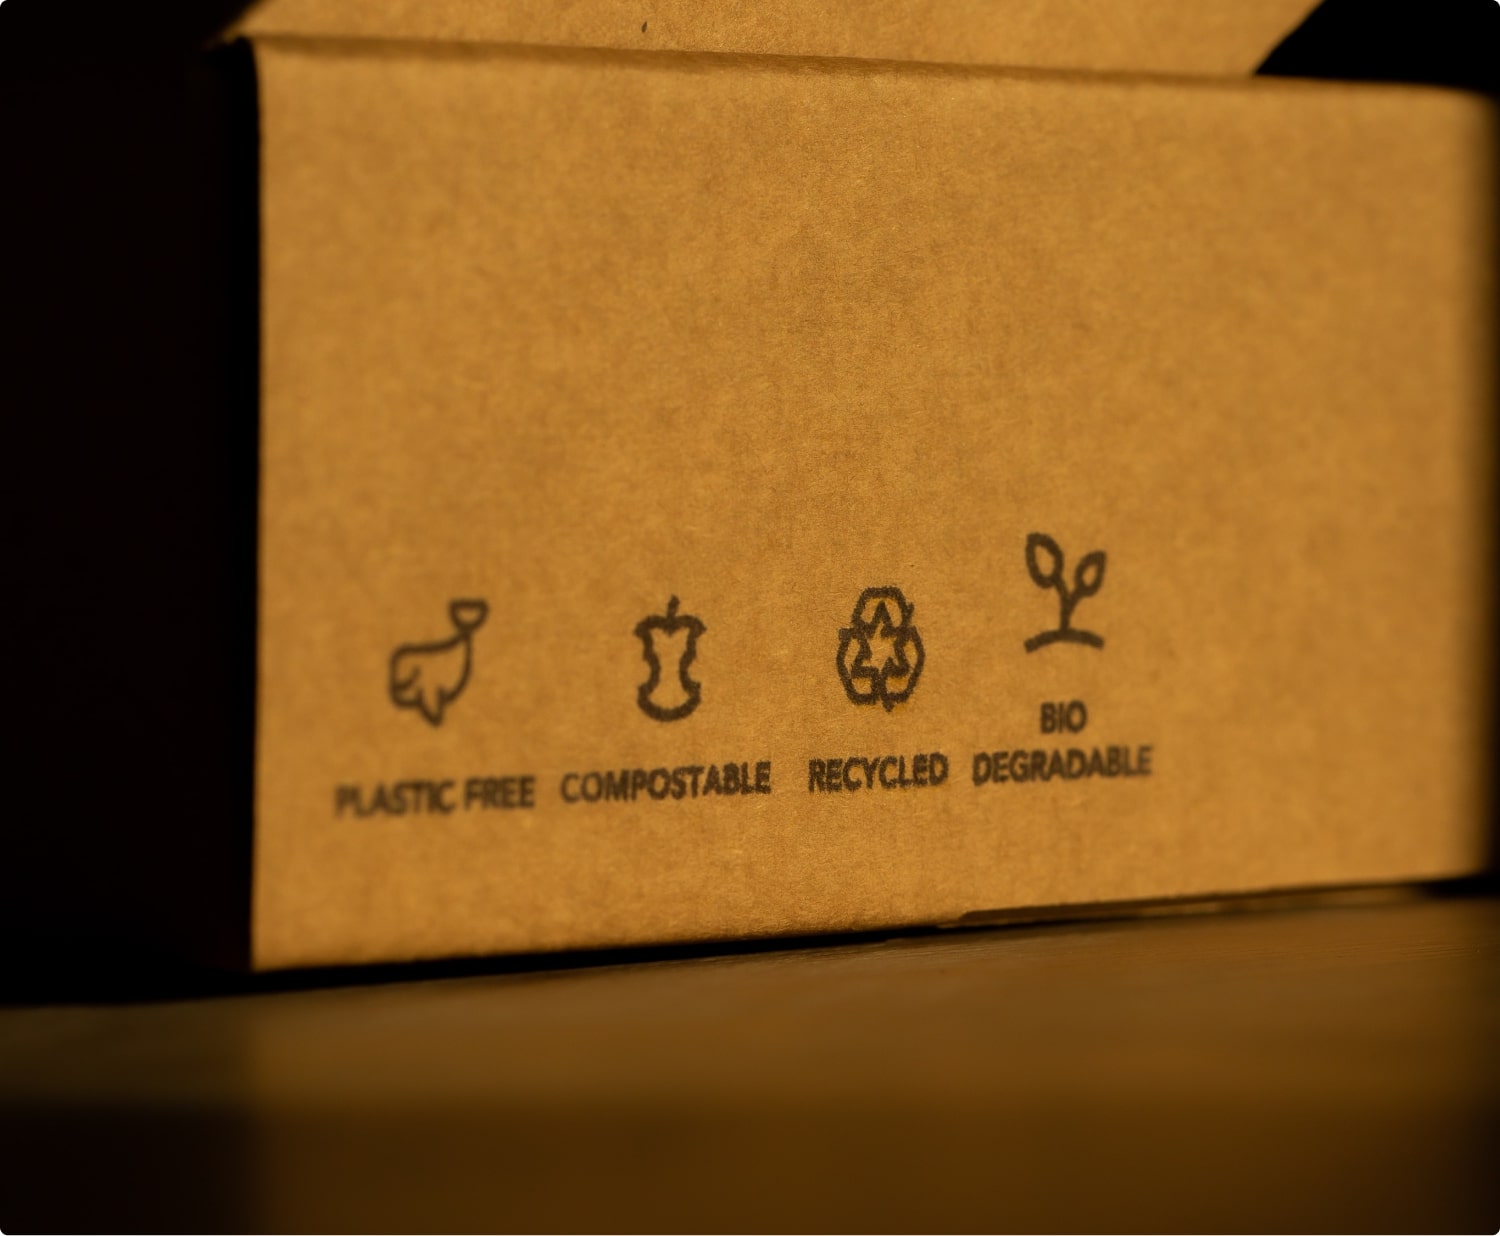 We use 100% post consumer recycled paper and reclaimed wheat straw.